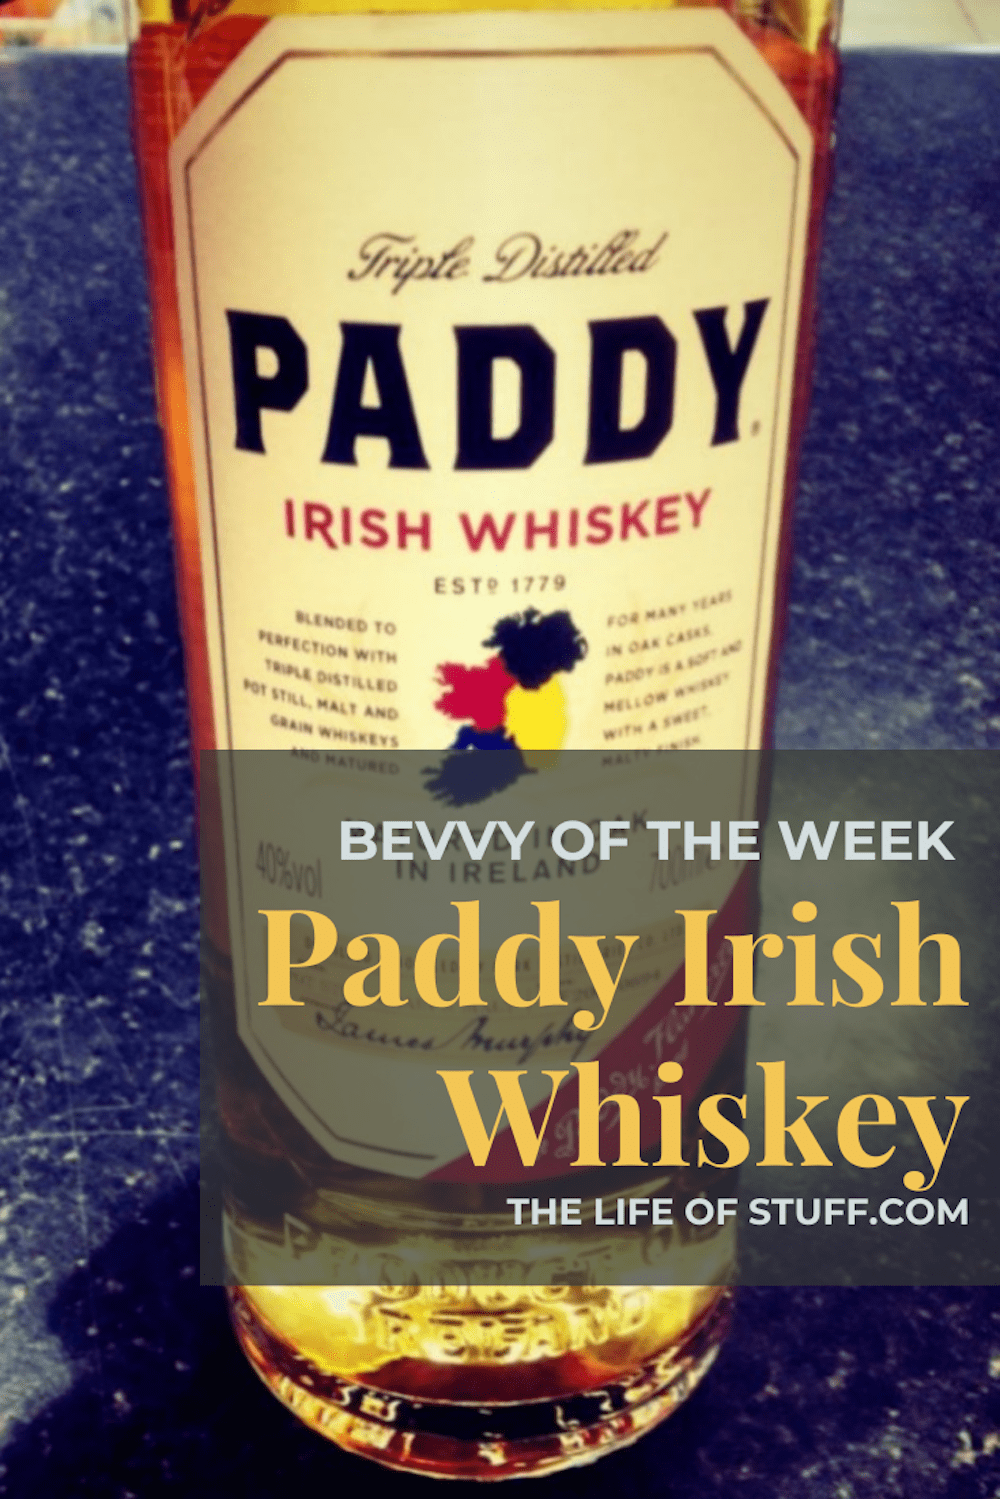 Bevvy of the Week - Paddy Irish Whiskey - The Life of Stuff